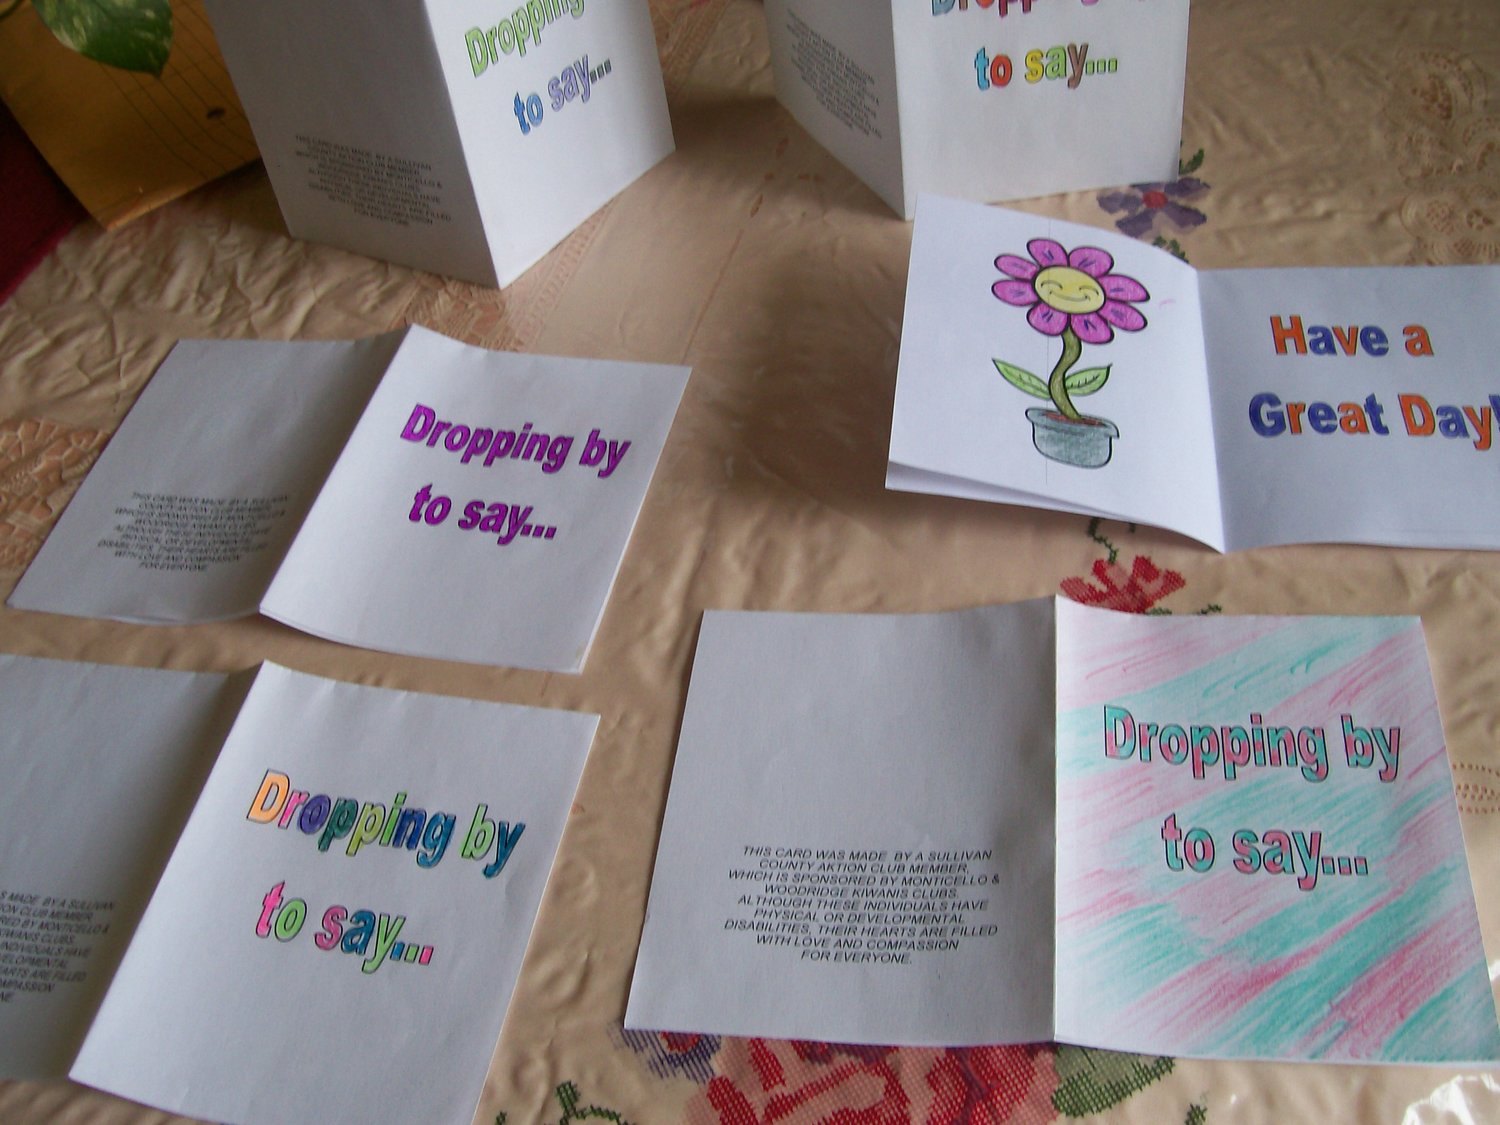 Cards made by members of Aktion Club of Sullivan County.